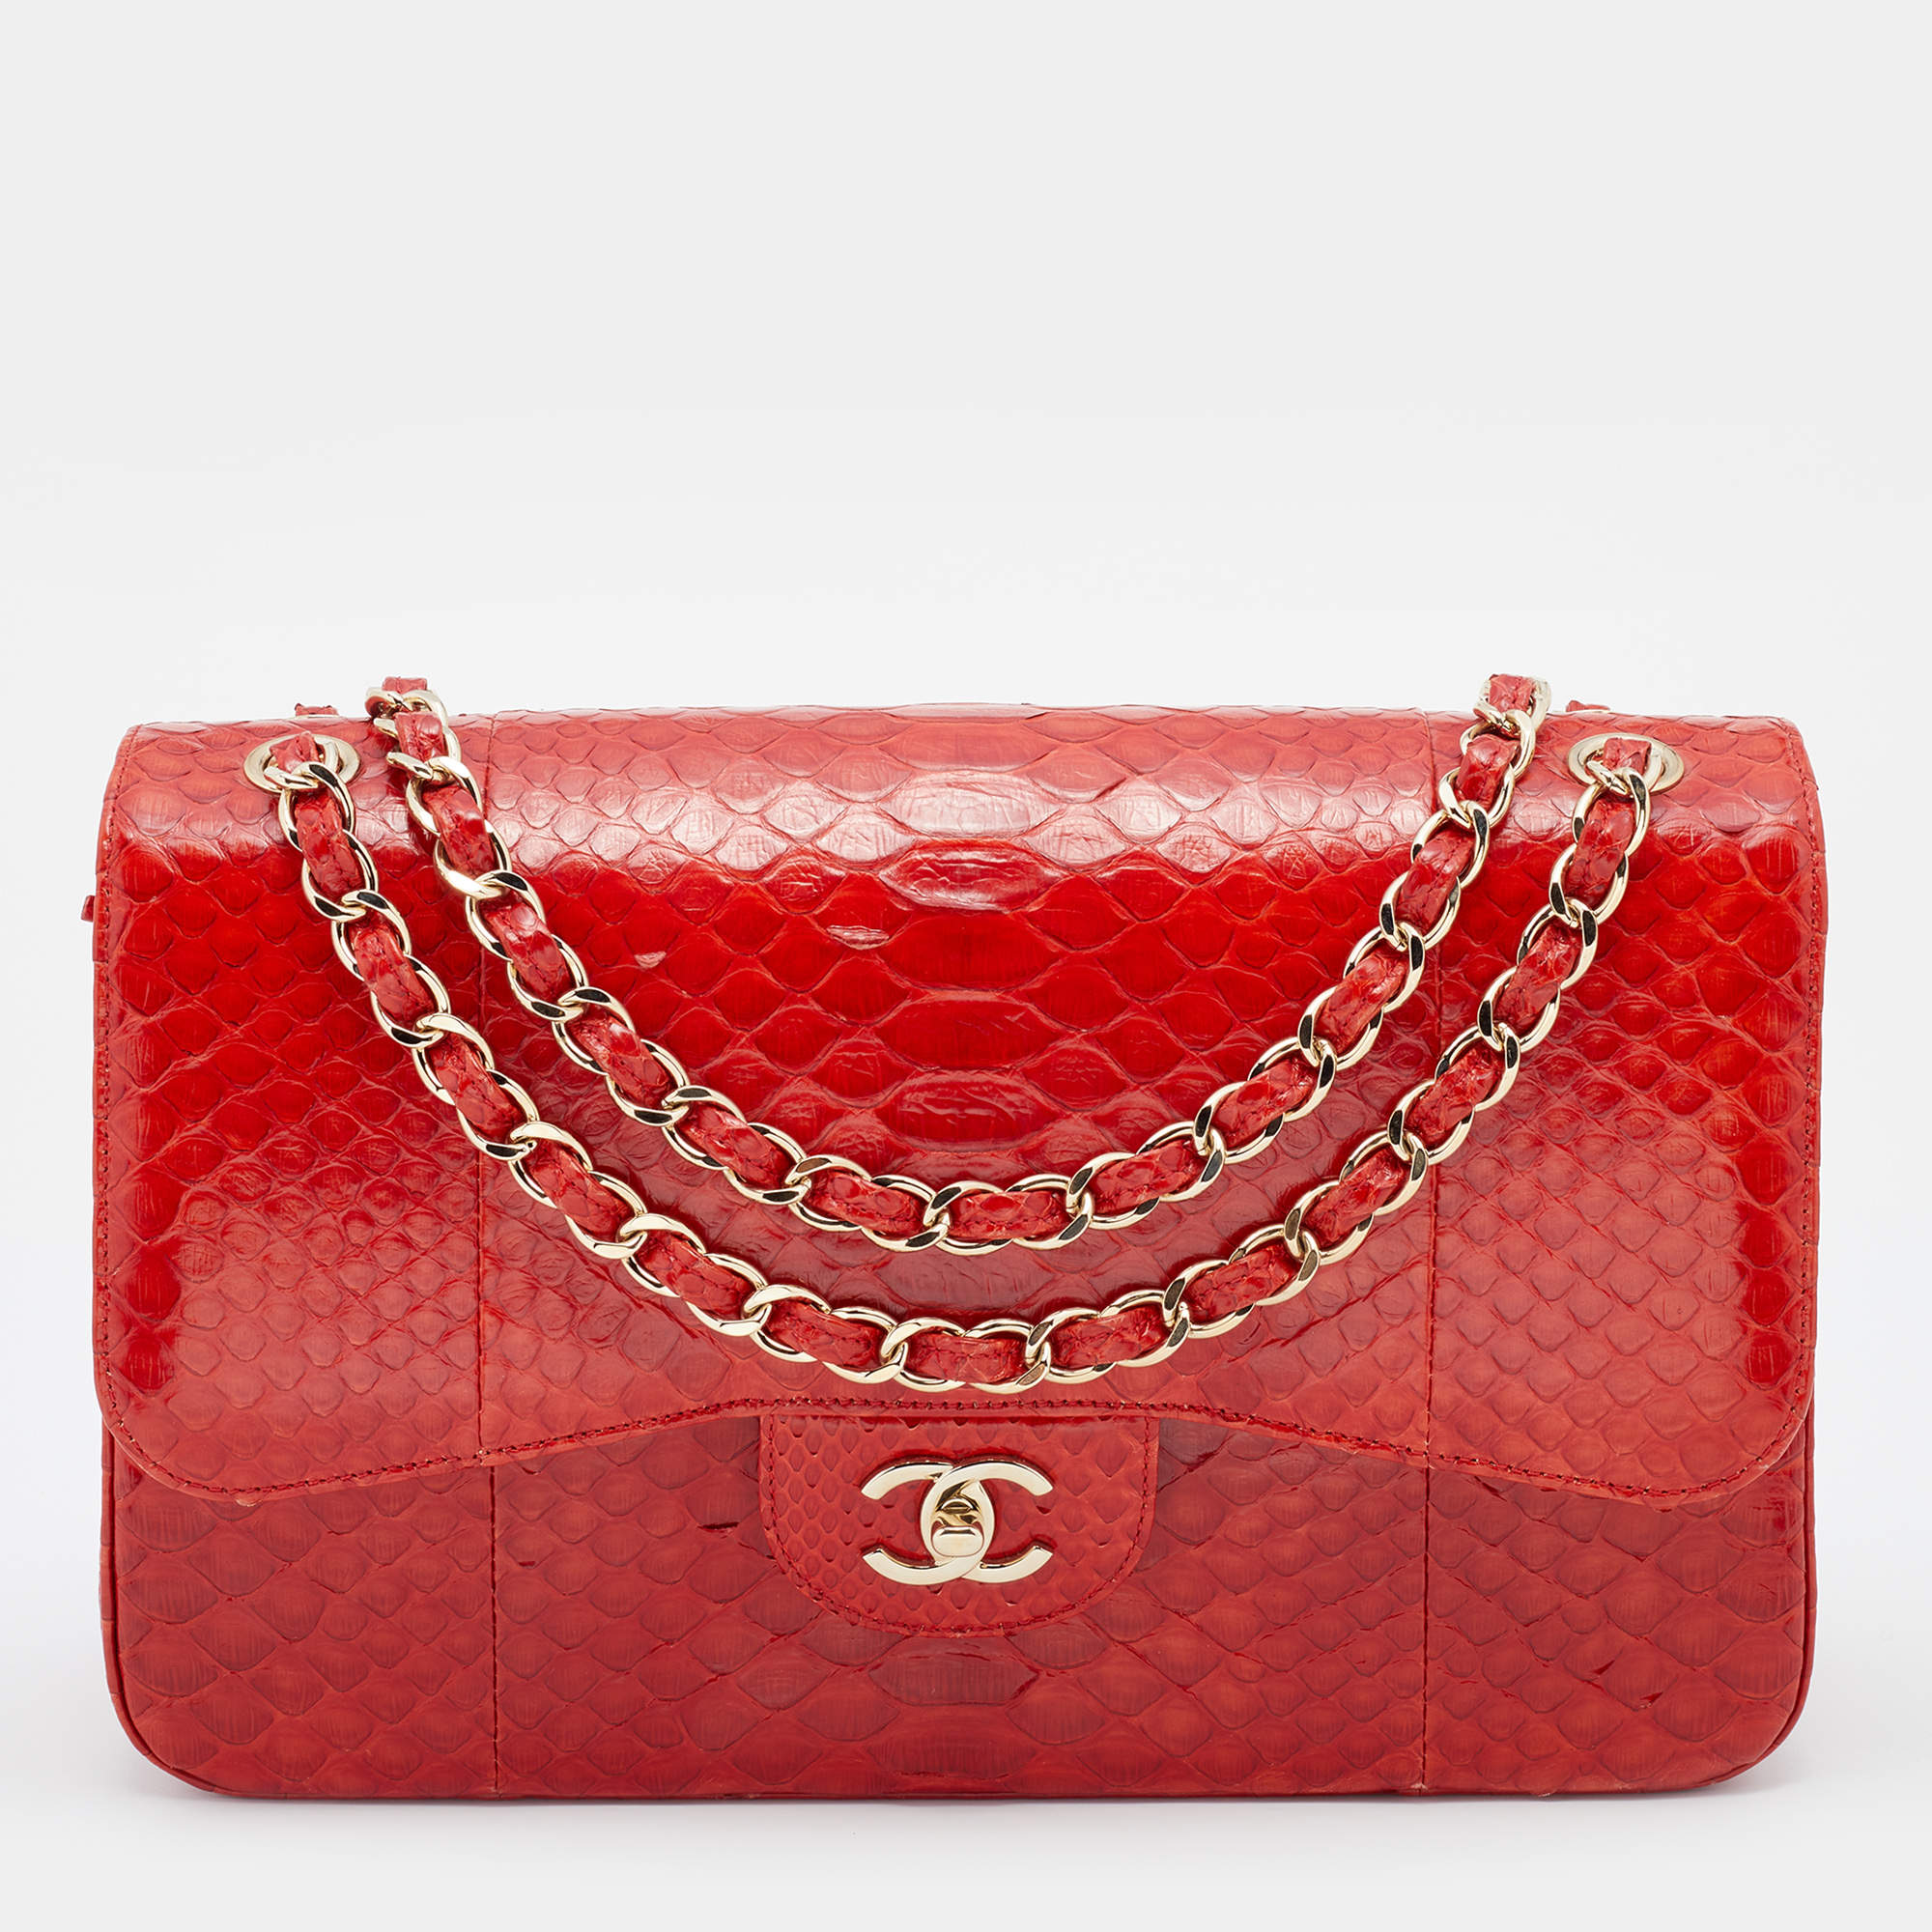 CHANEL Vintage 1990's Quilted Leather Tote Bag -  Israel